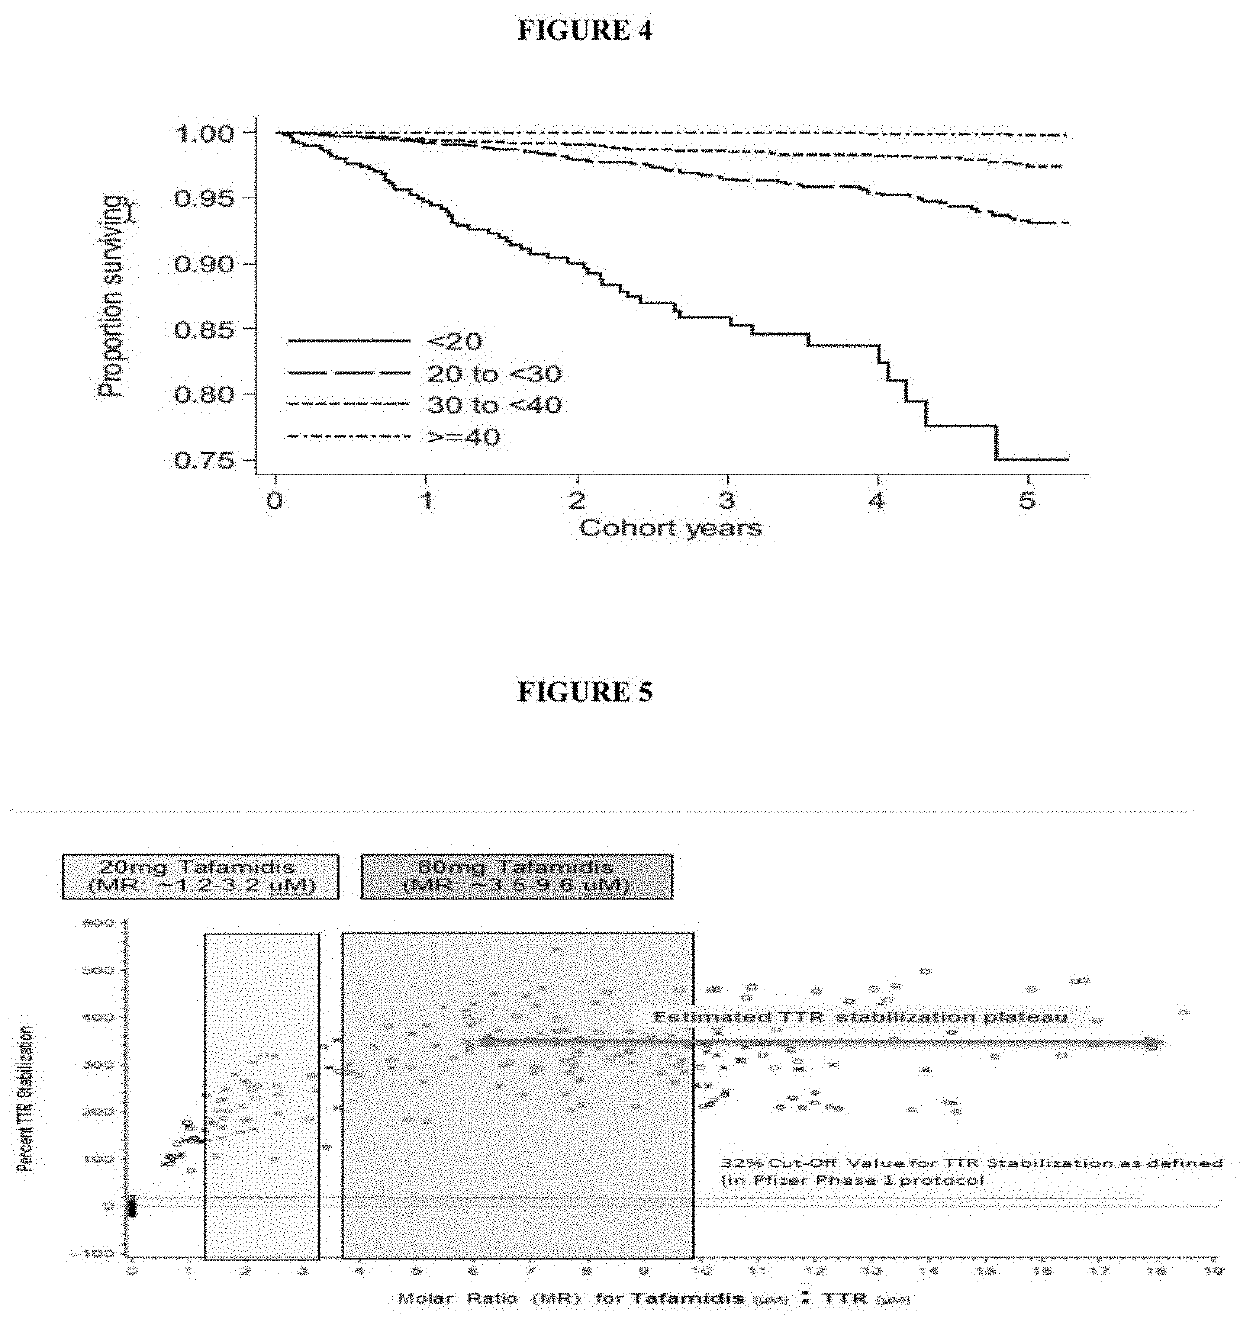 Methodologies and methods for measuring higher molecular weight transthyretin or equivalents as a clinical biomarker